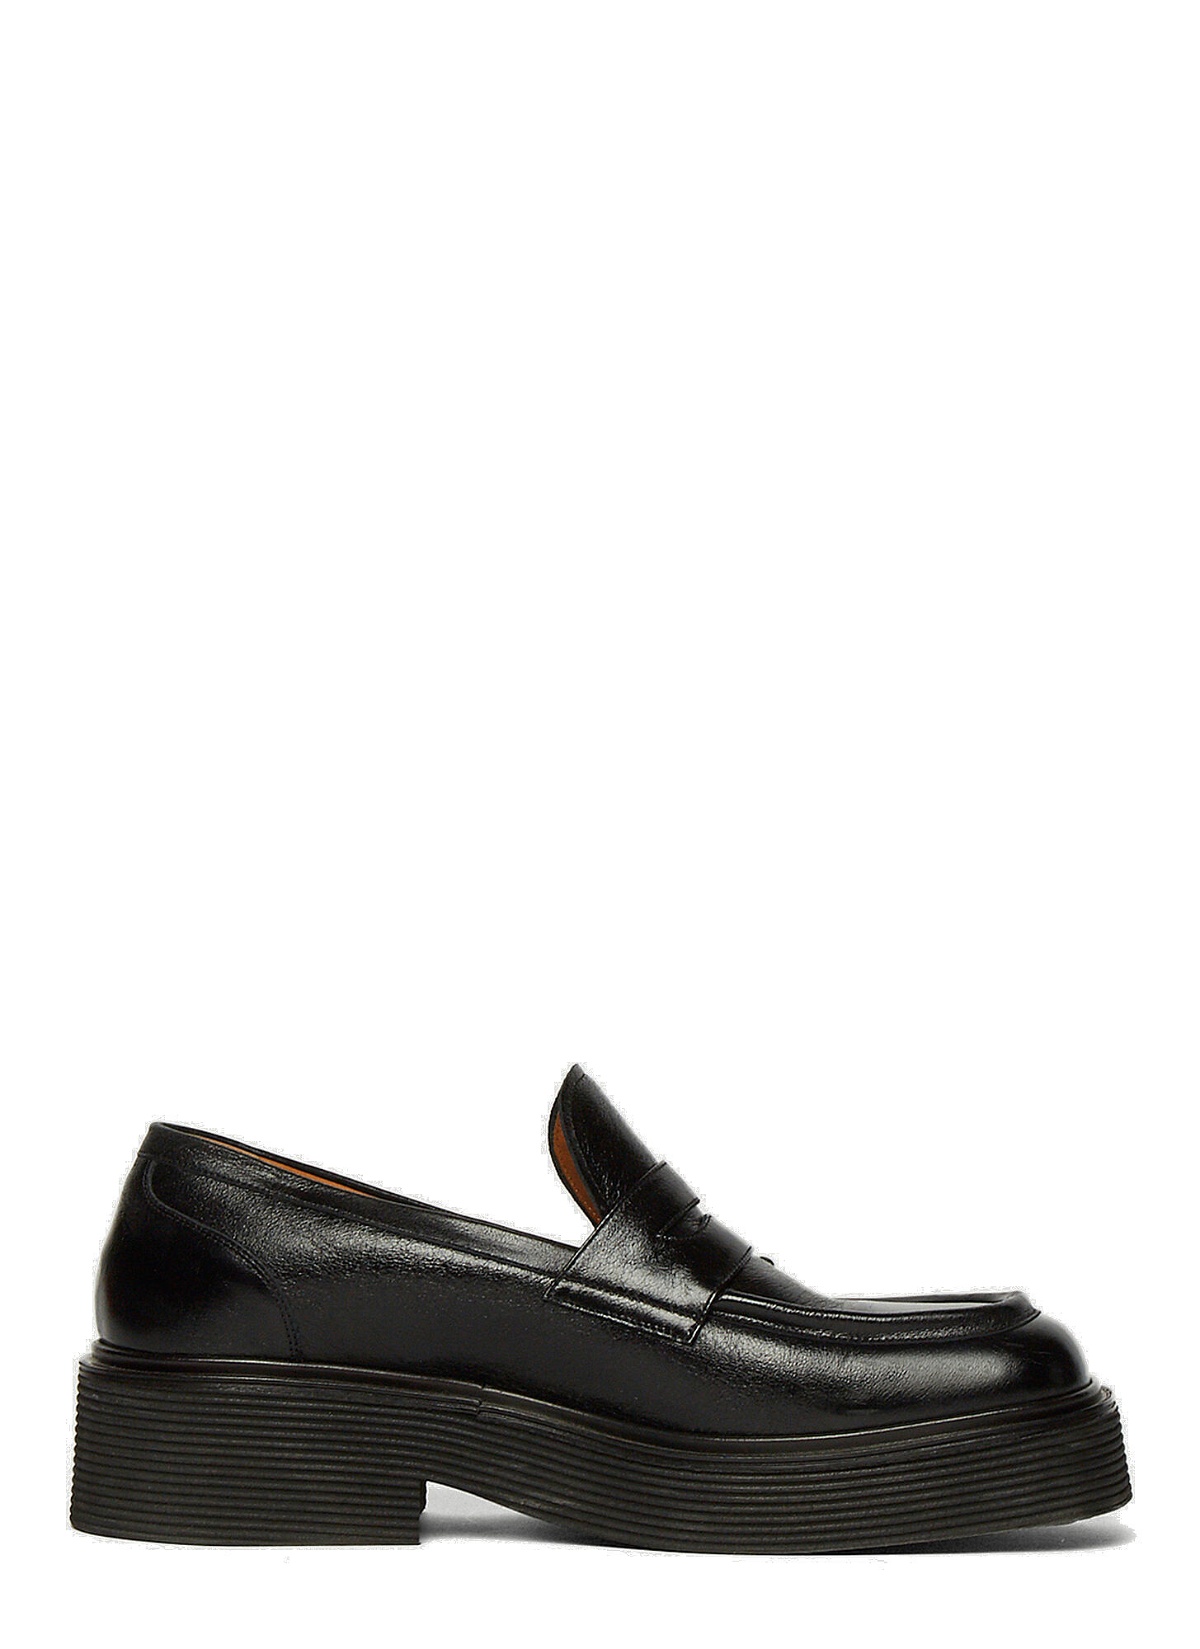 Photo: Pierced Penny Loafers in Black